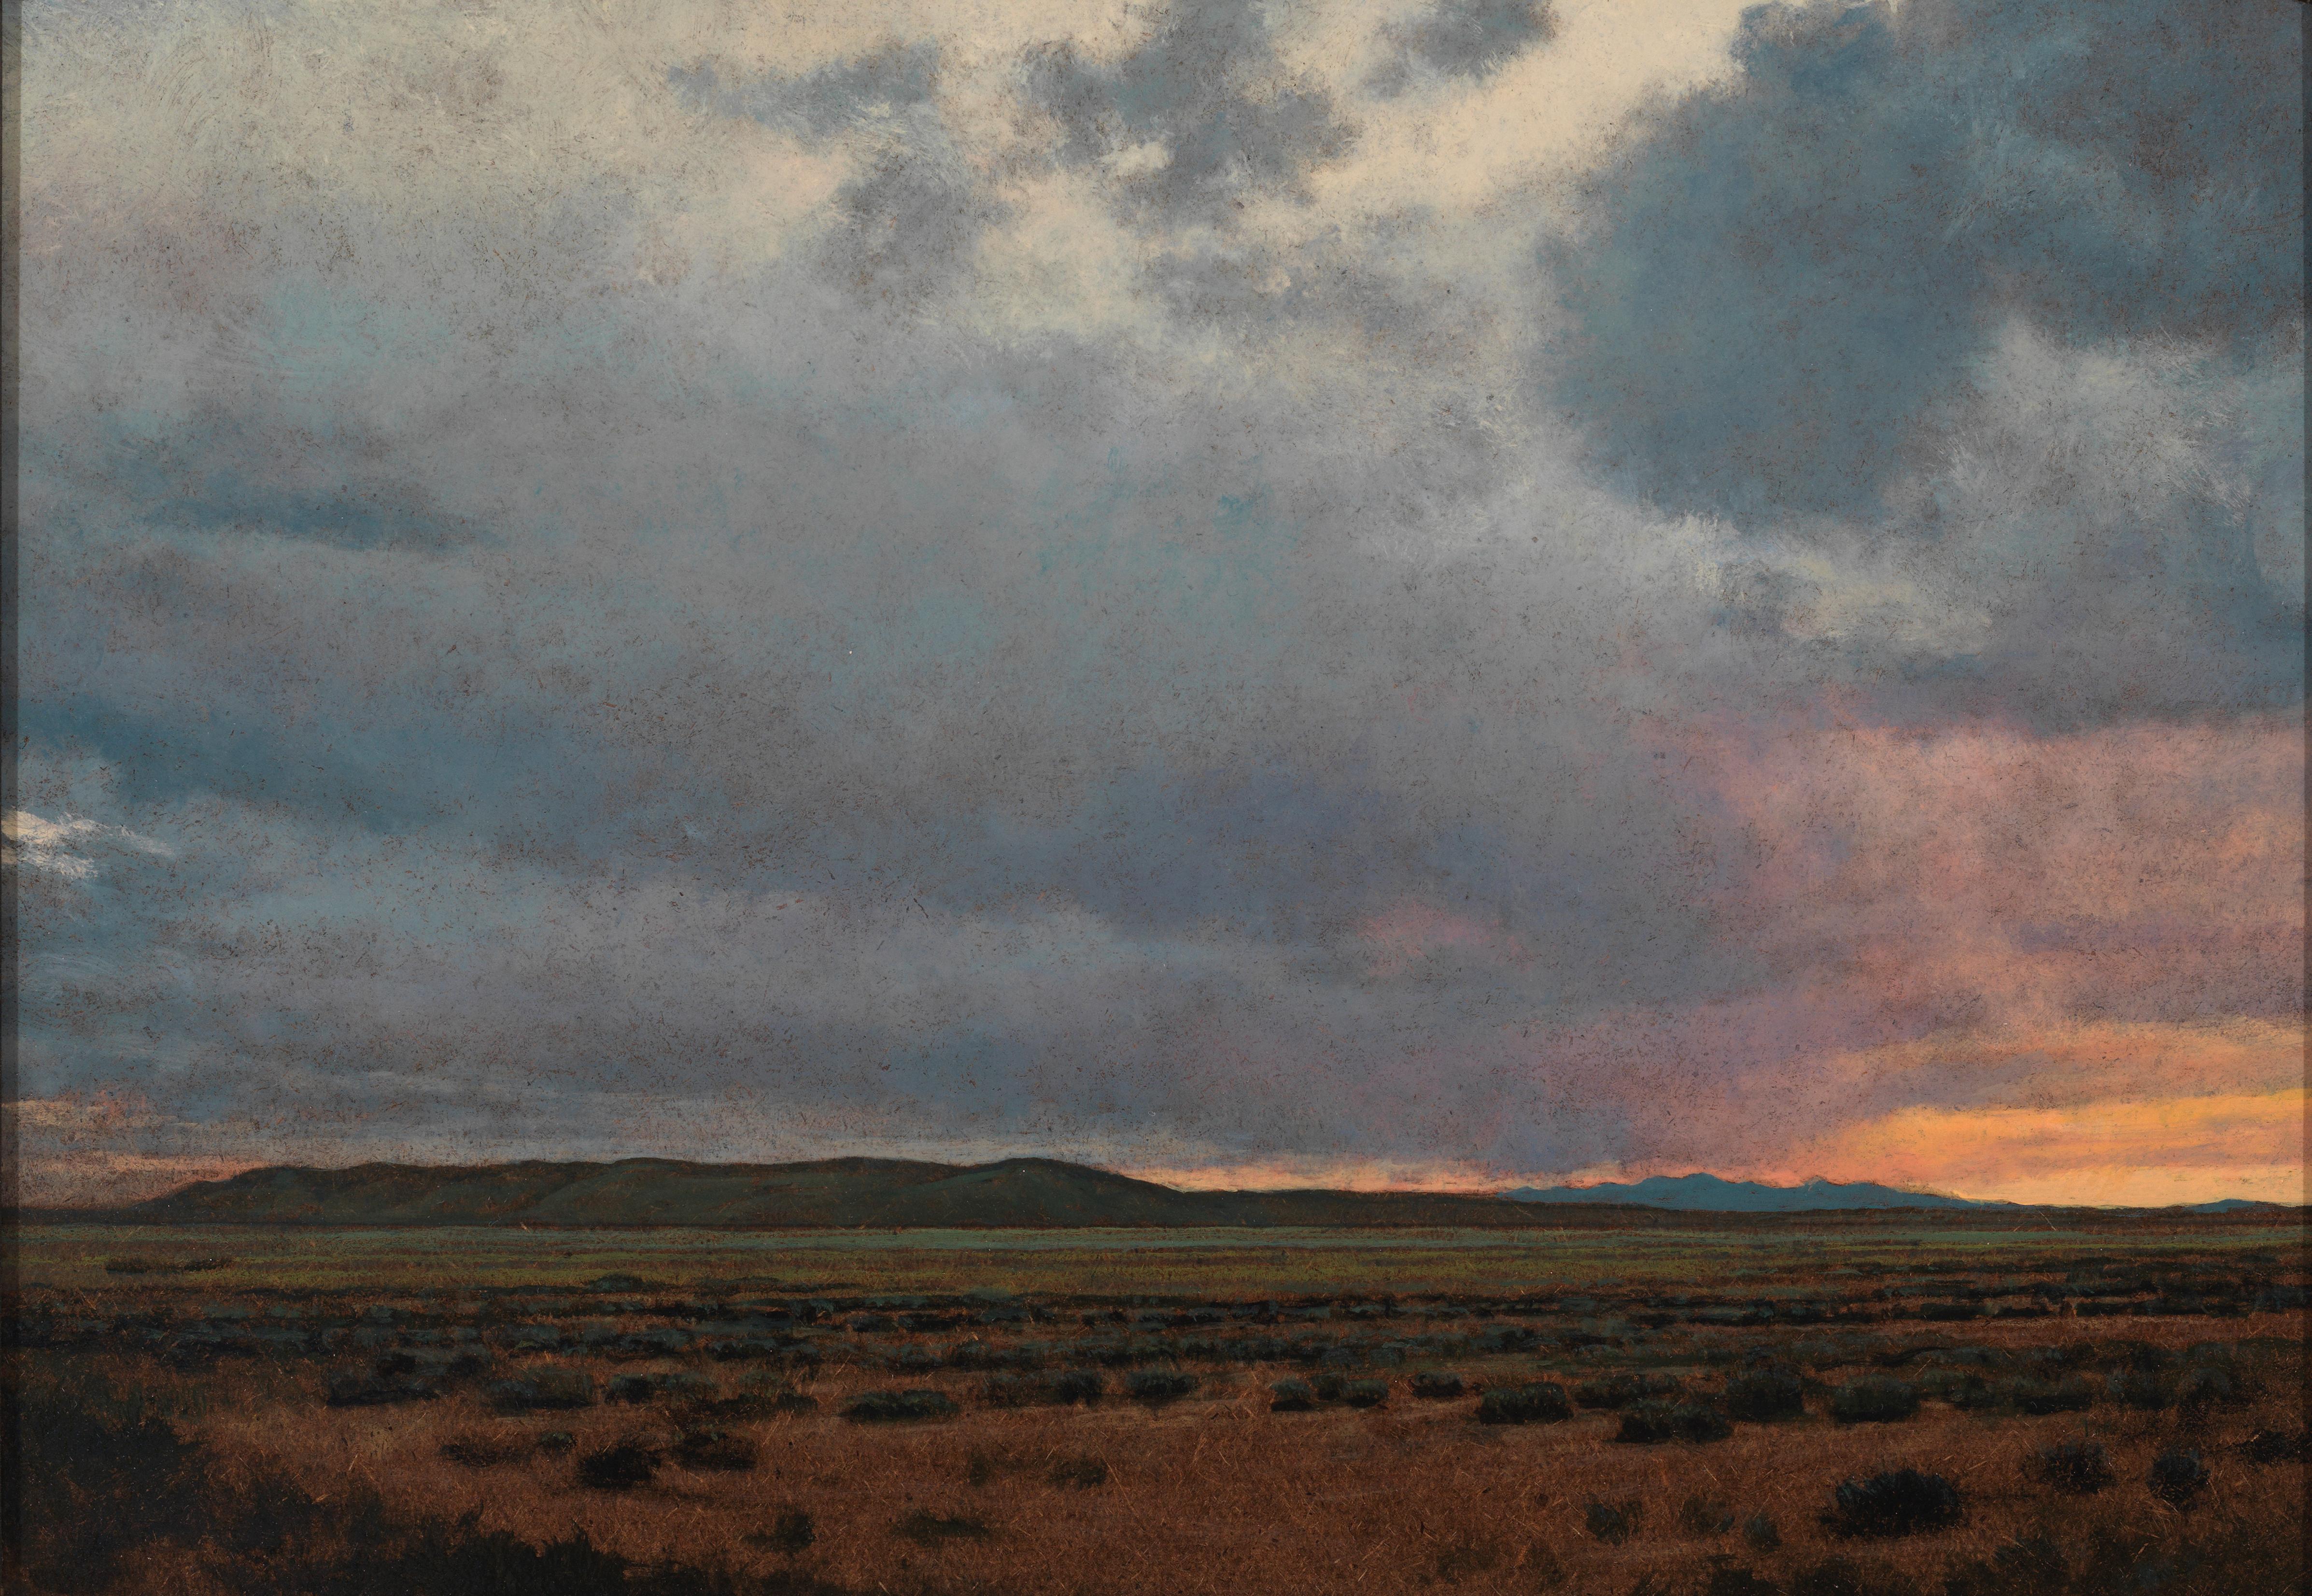 Loose brush strokes in this small scale painting capture the dramatic skies of the Southwest United States.  The foreground builds to a mountain filled horizon creating great depth texture, while a soft glow of light contrasts against voluminous